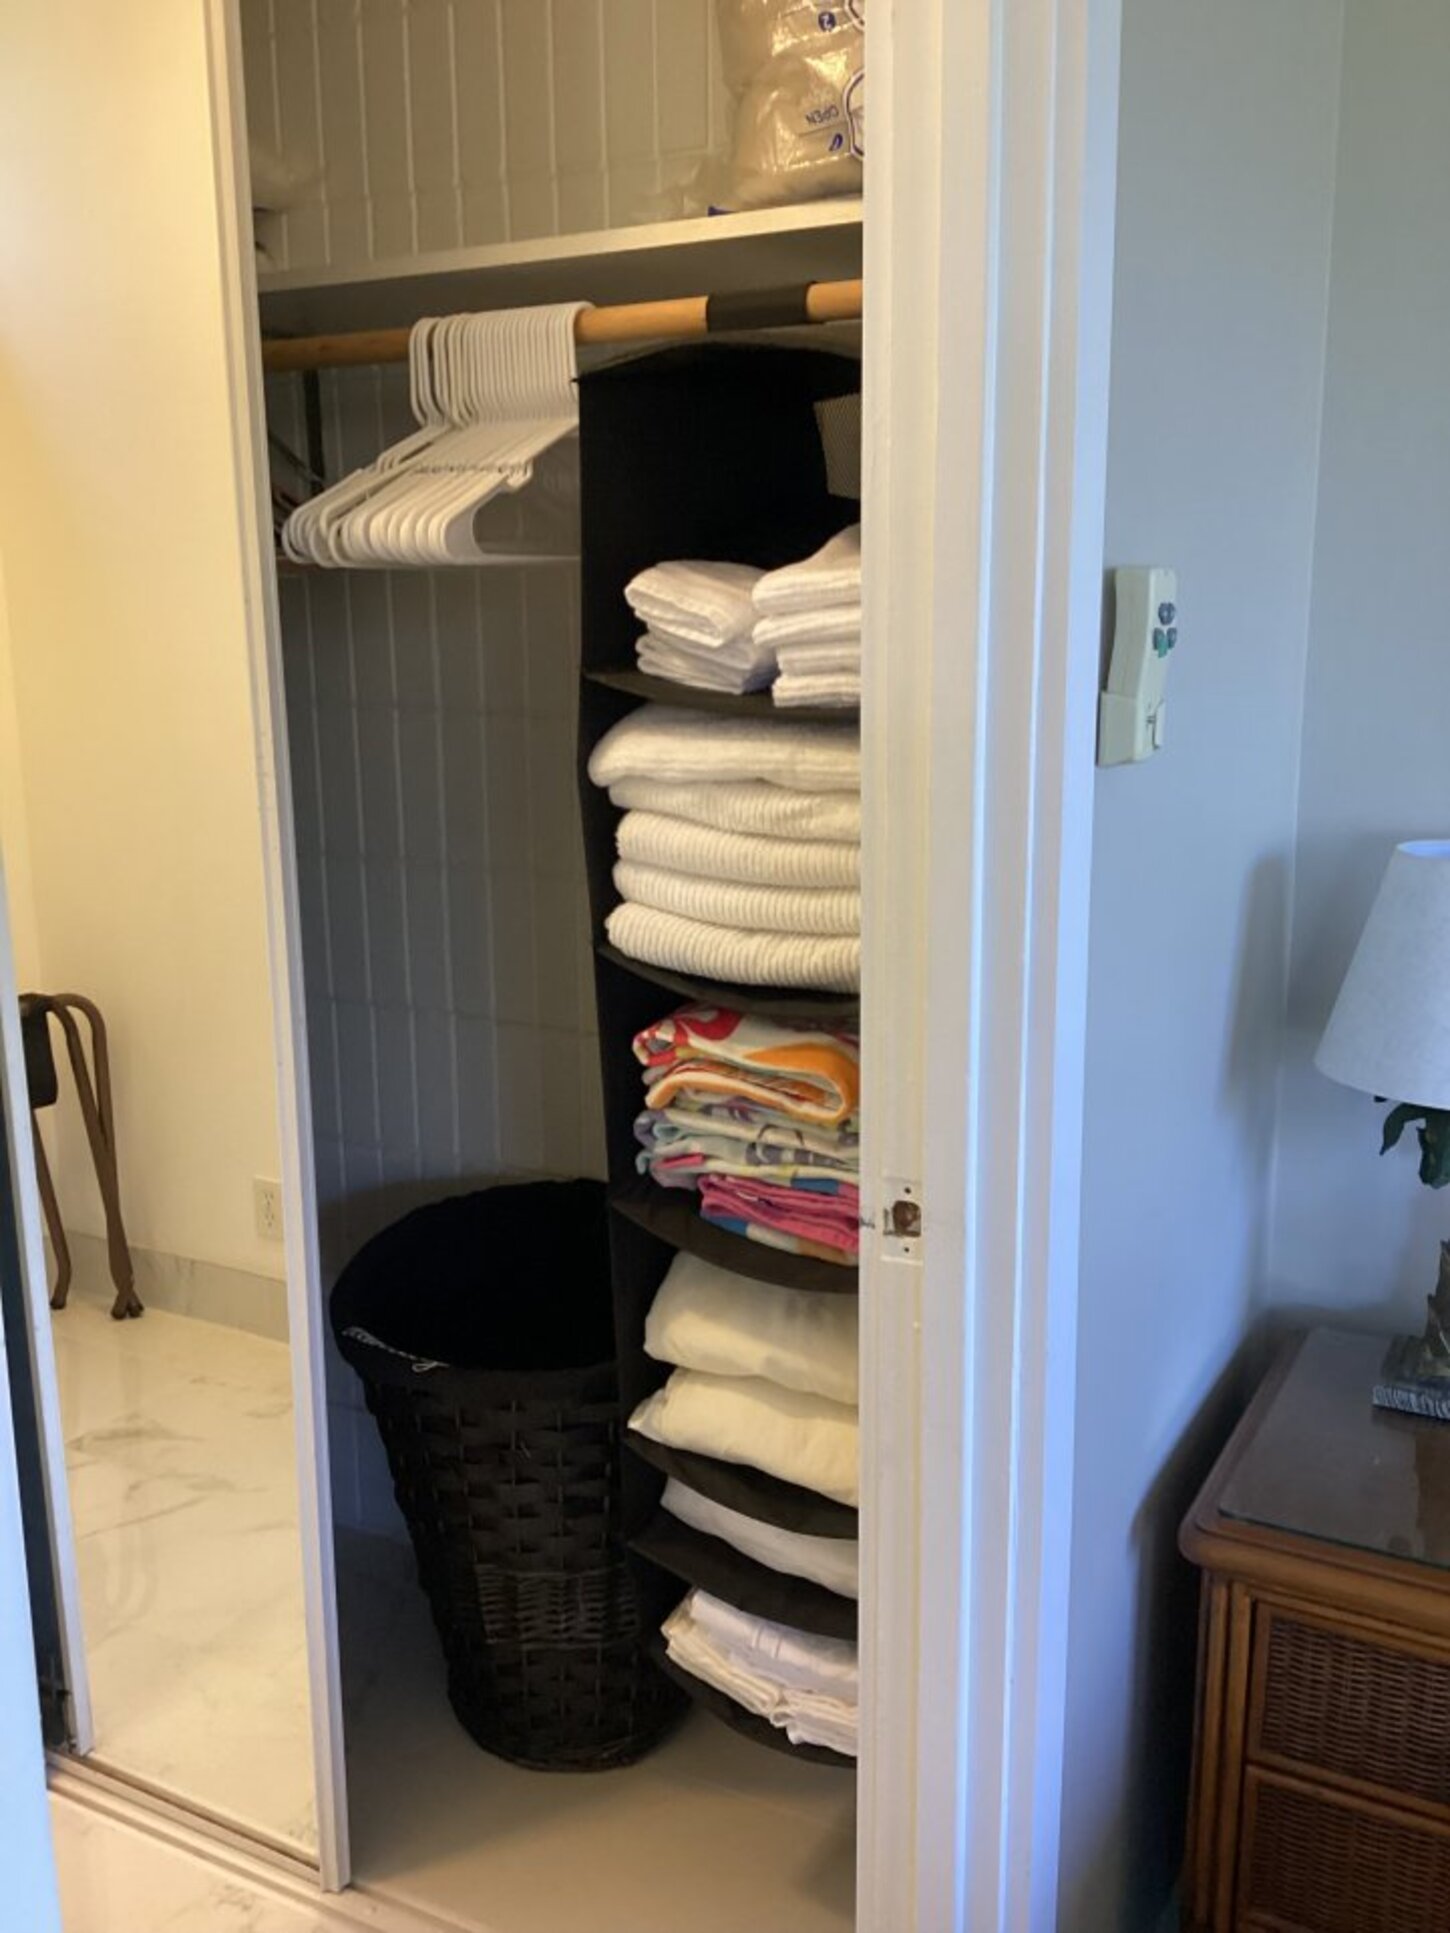 Linens and towels